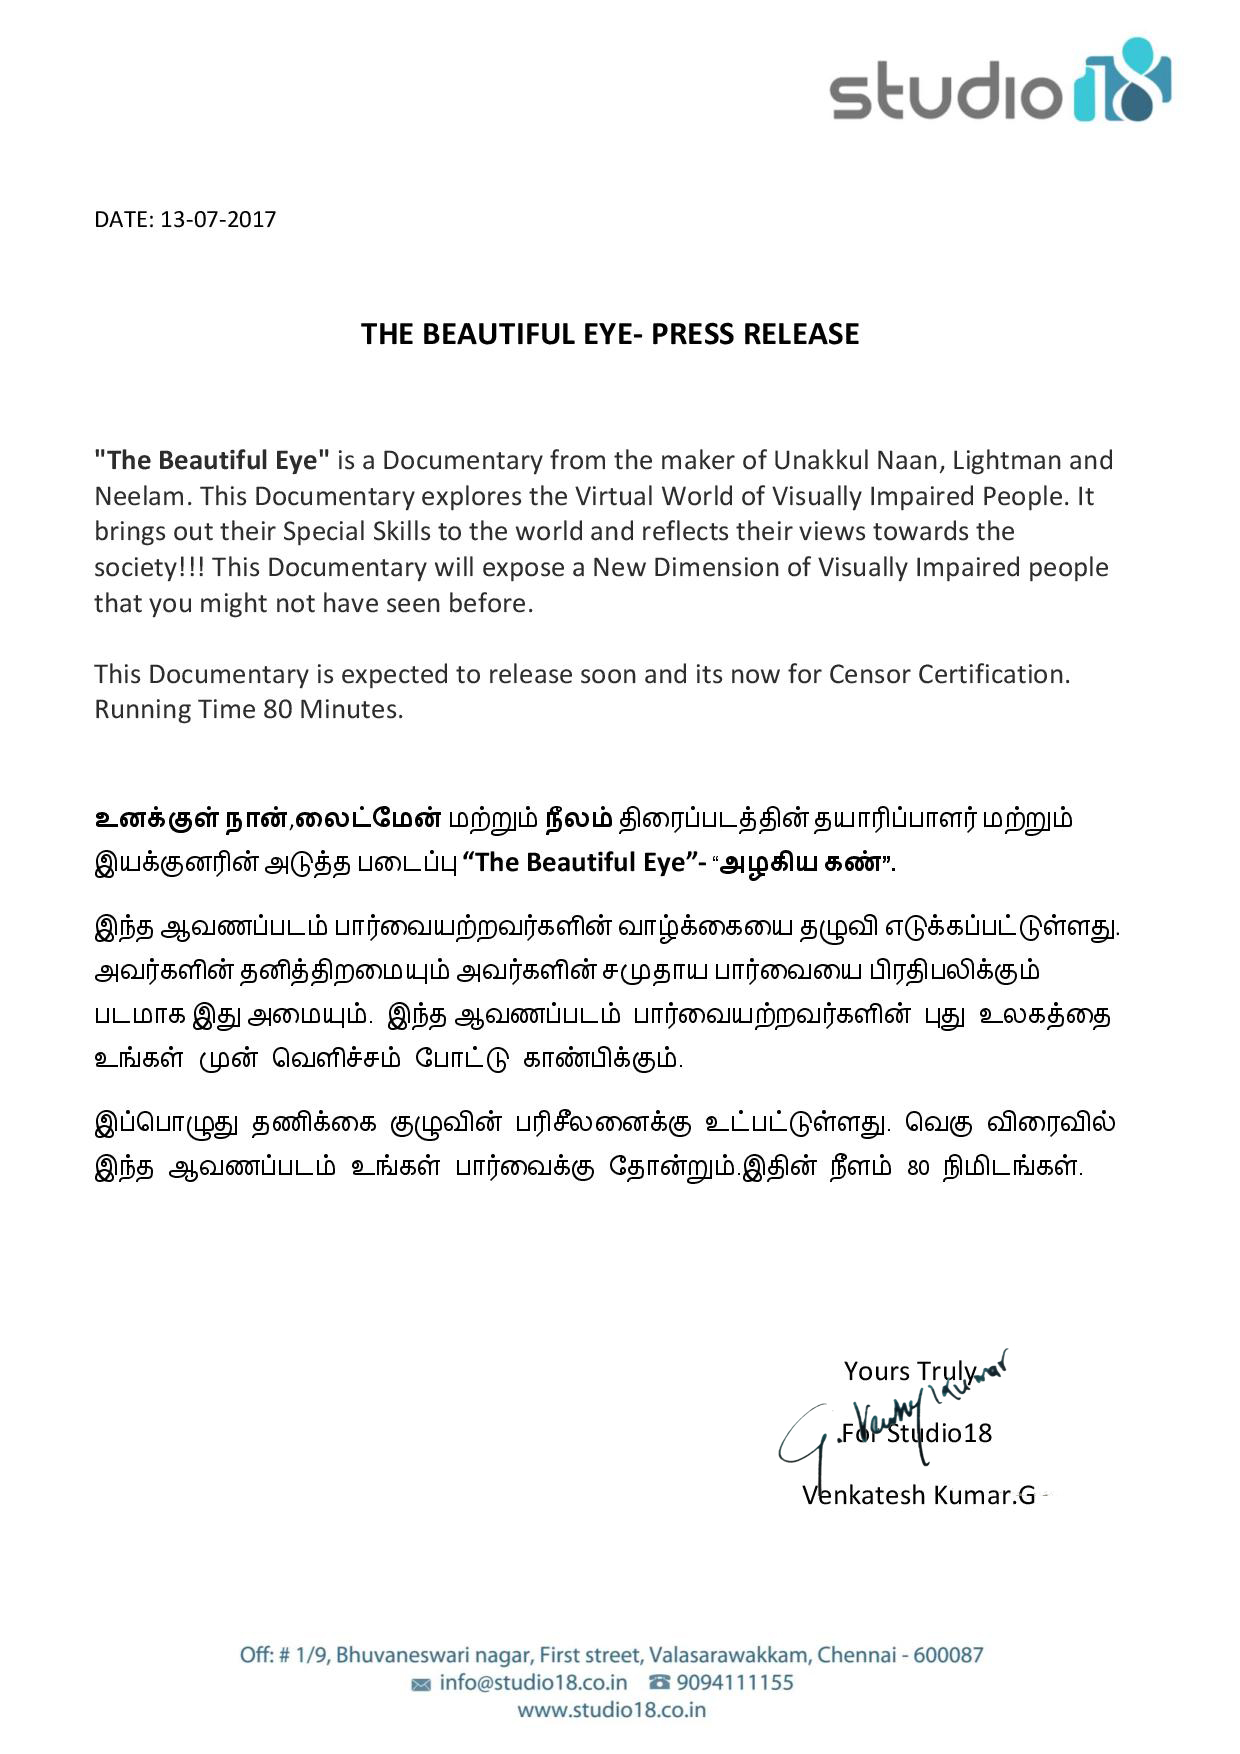 The Beautiful Eye Documentary Press Release - English and Tamil